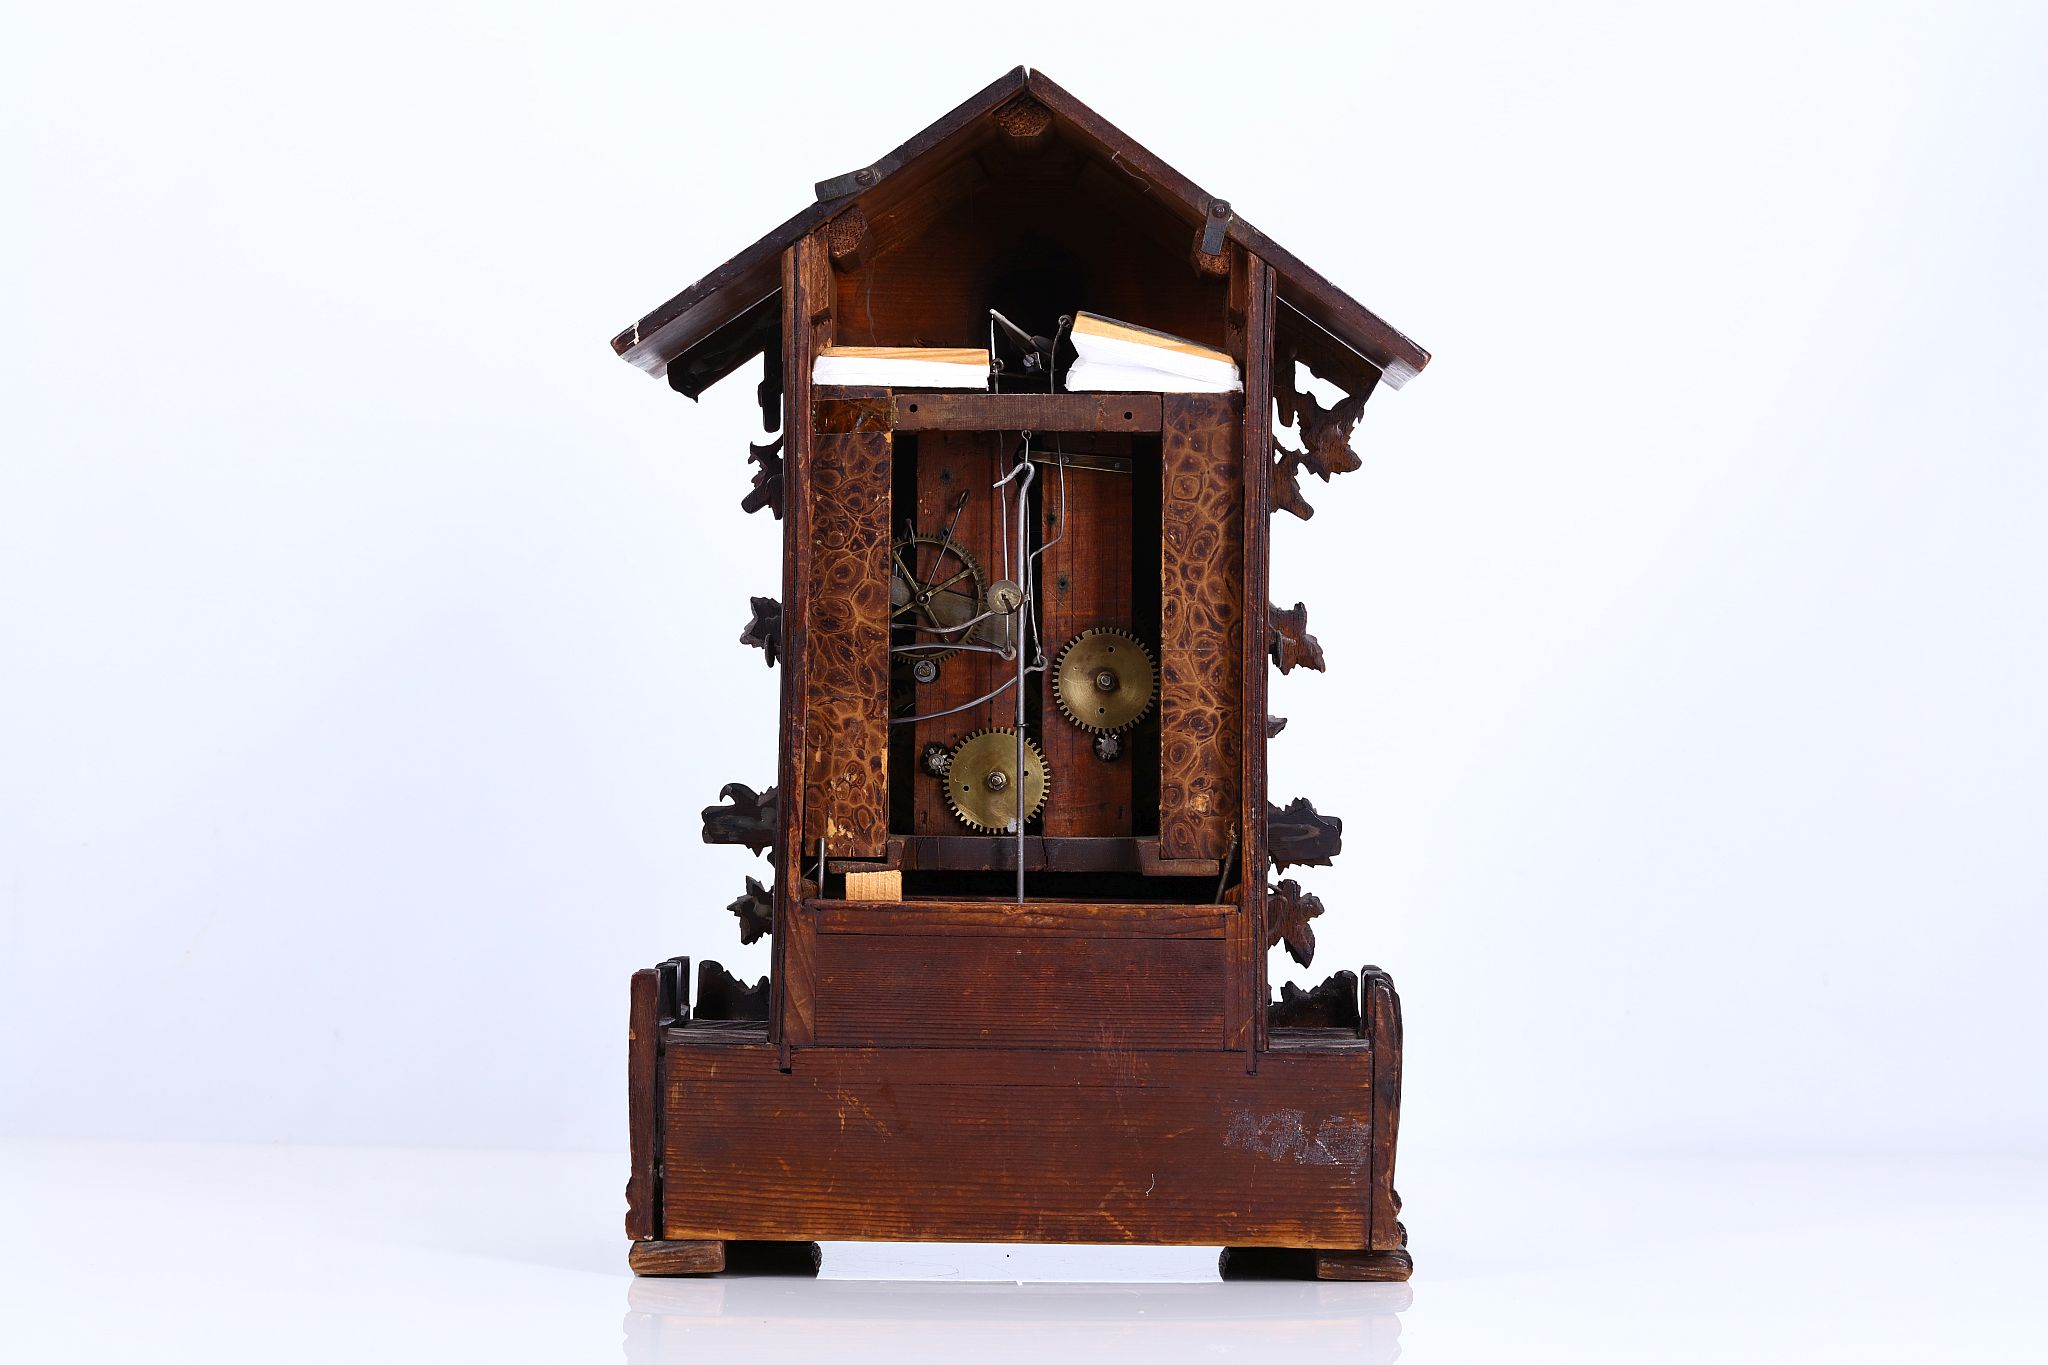 WITHDRAWN A 19TH CENTURY BLACK FOREST CARVED WOOD CUCKOO CLOCK of typical form with pitched roof - Image 2 of 6